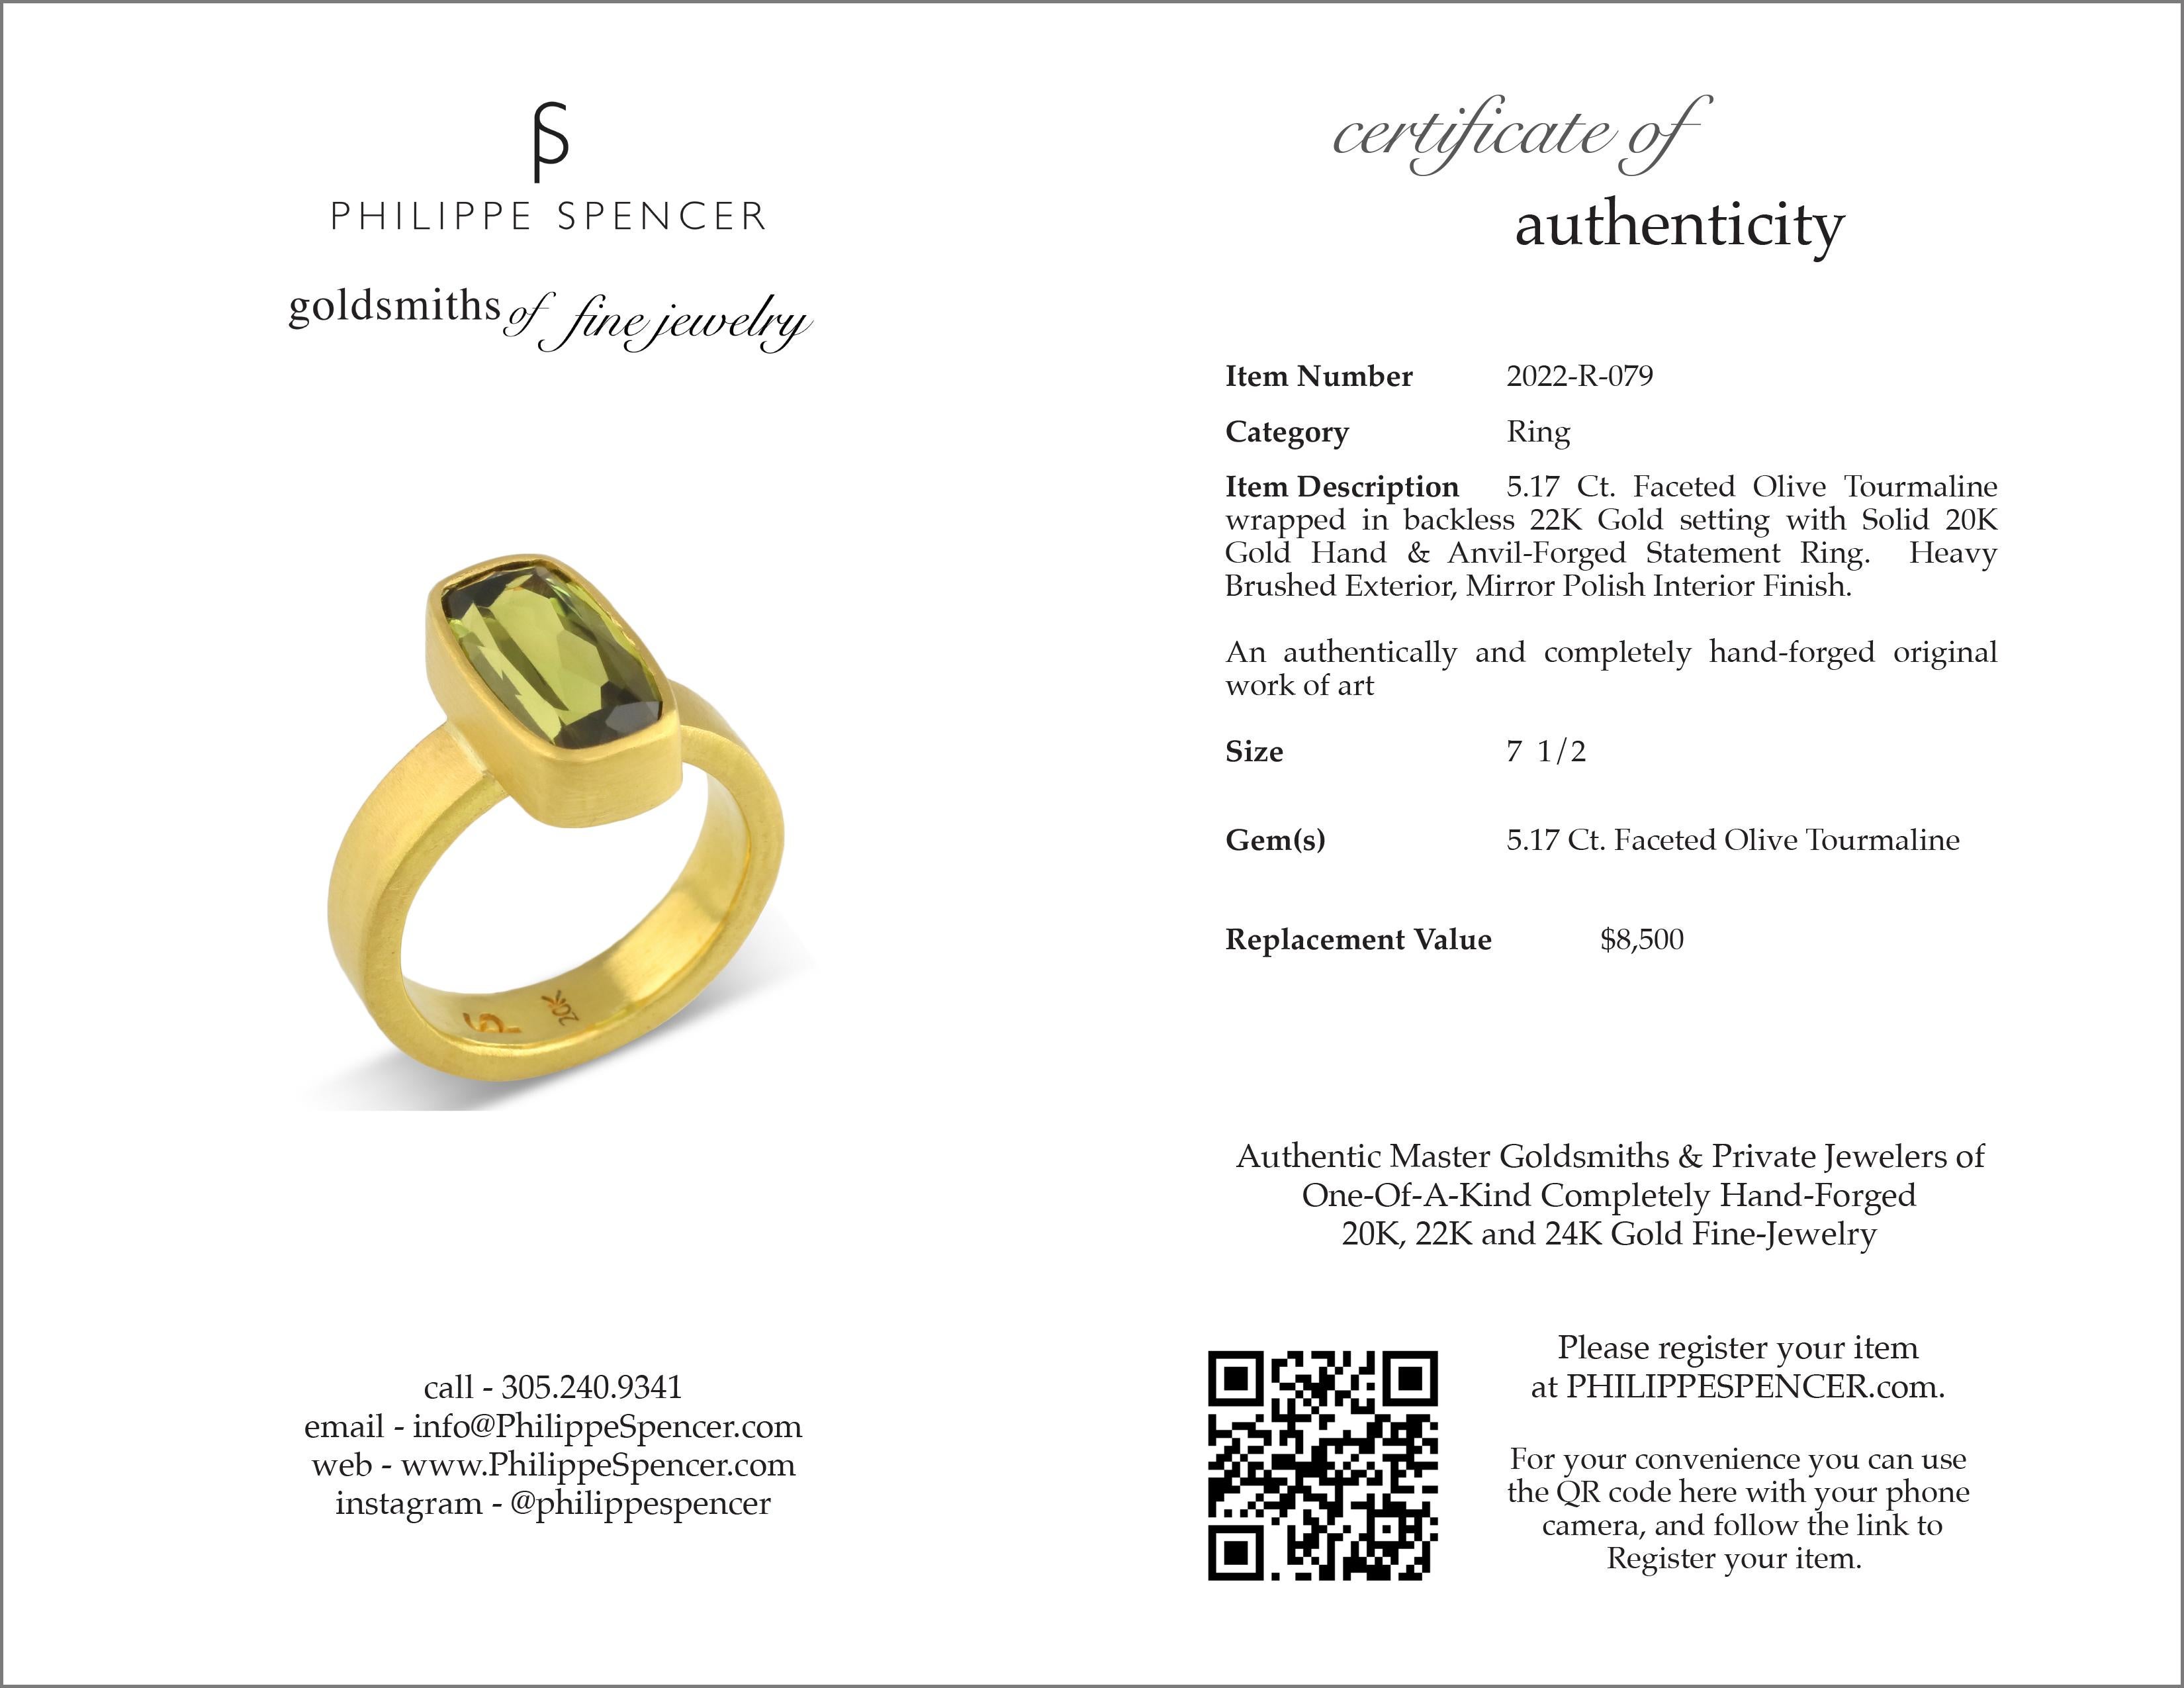 Cushion Cut PHILIPPE SPENCER 5.17 Ct. Olive Tourmaline in 22K and 20K Gold Statement Ring For Sale